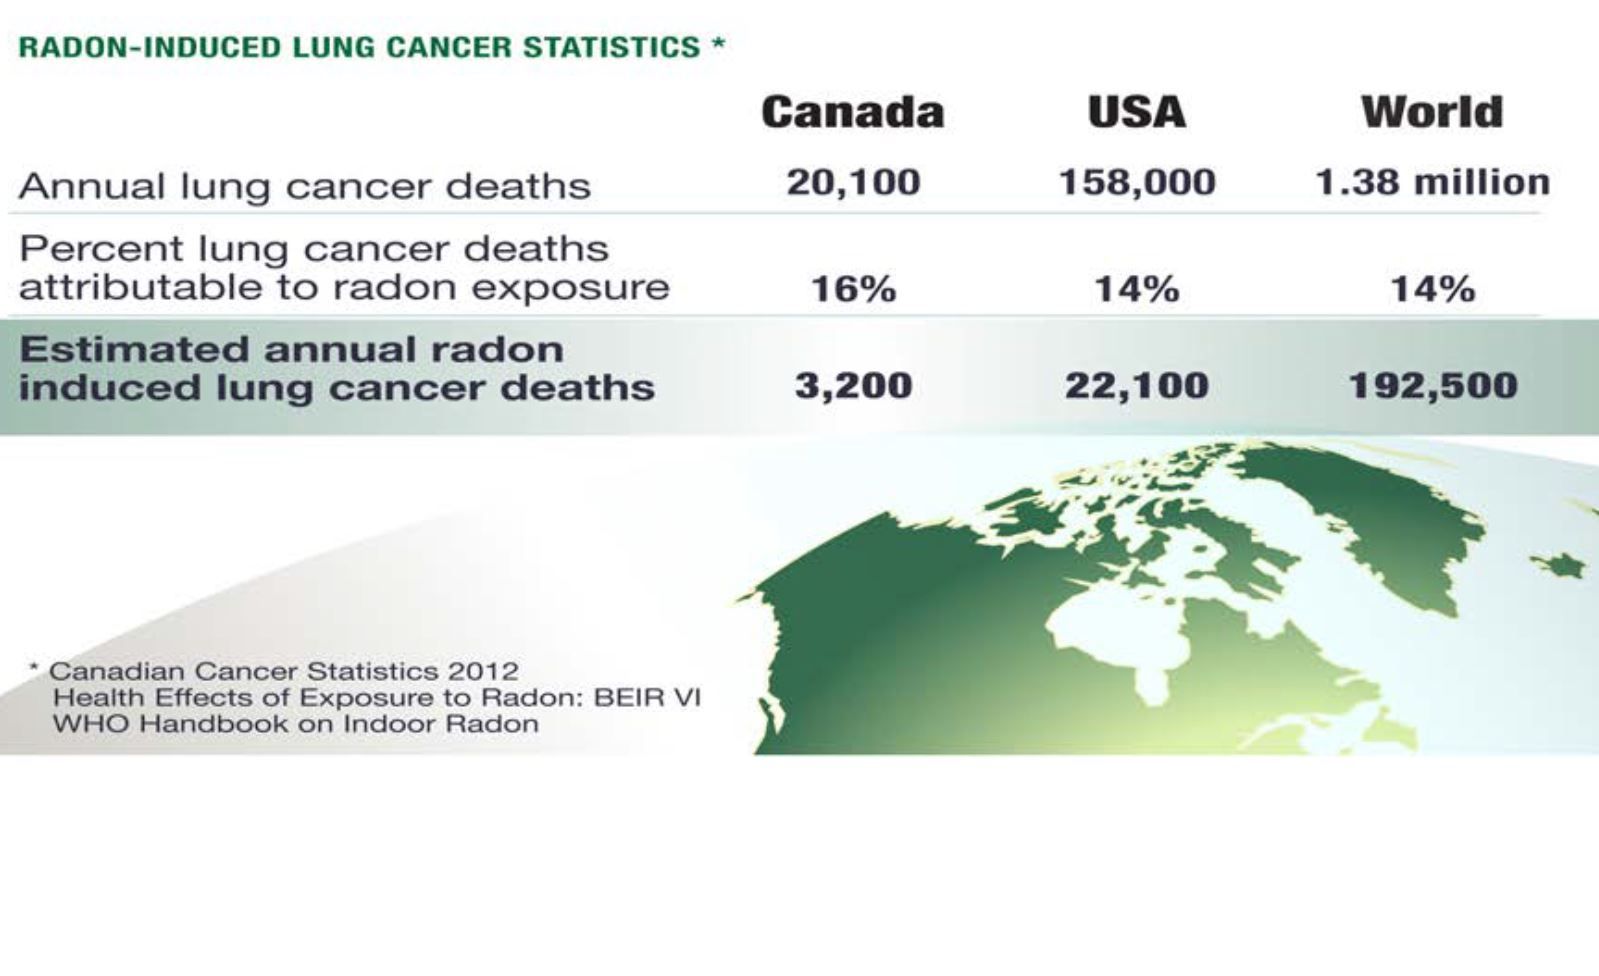 radon the second cause of lung cancer in Canada after smoking